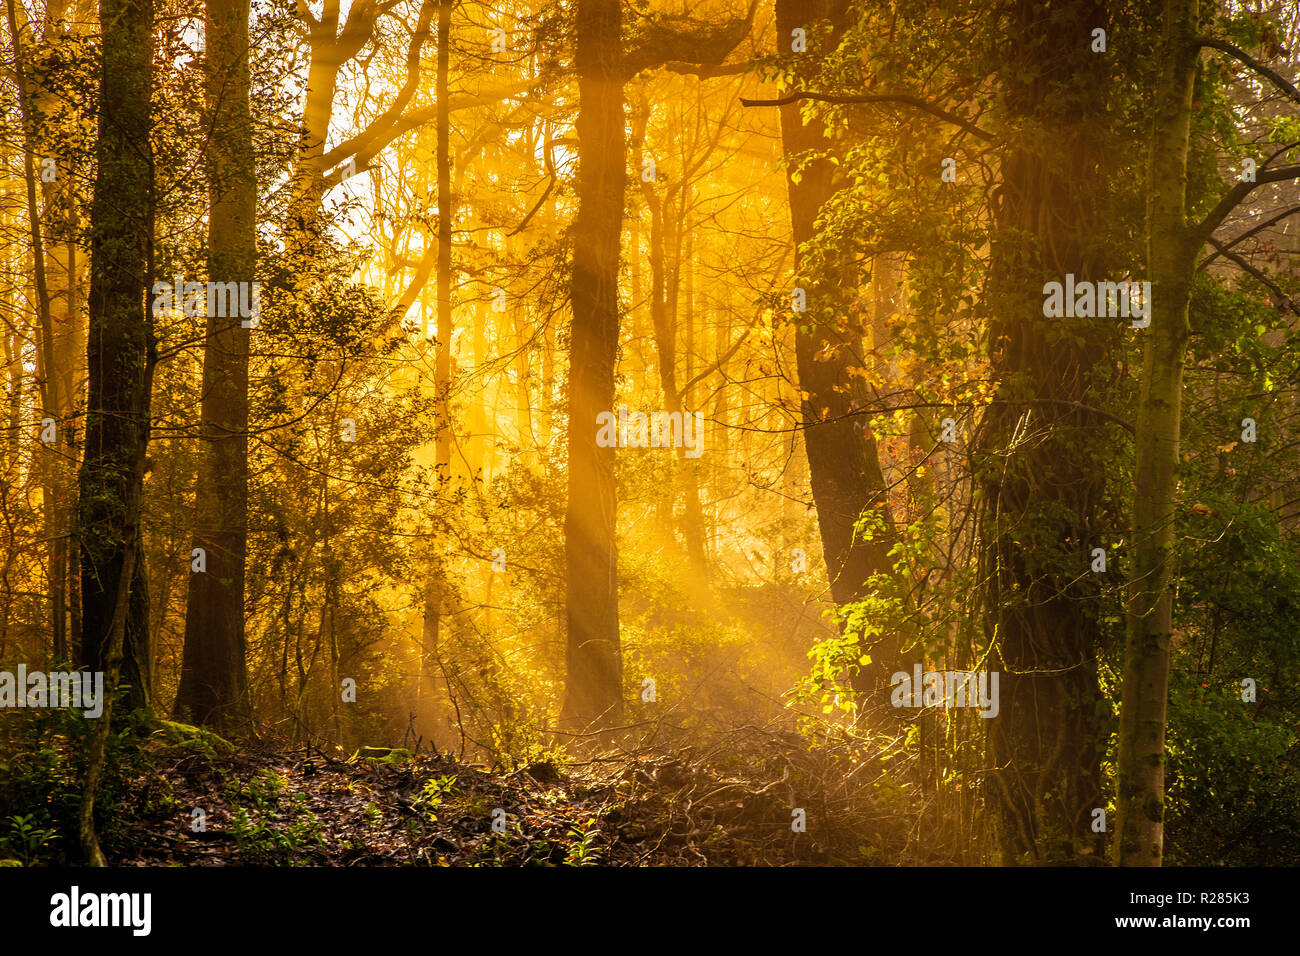 Bowness on Windermere, Lake District, England, 17th November 2018, Autumn sunlight streams through the trees. Credit: Russell Millner/Alamy Live News Stock Photo